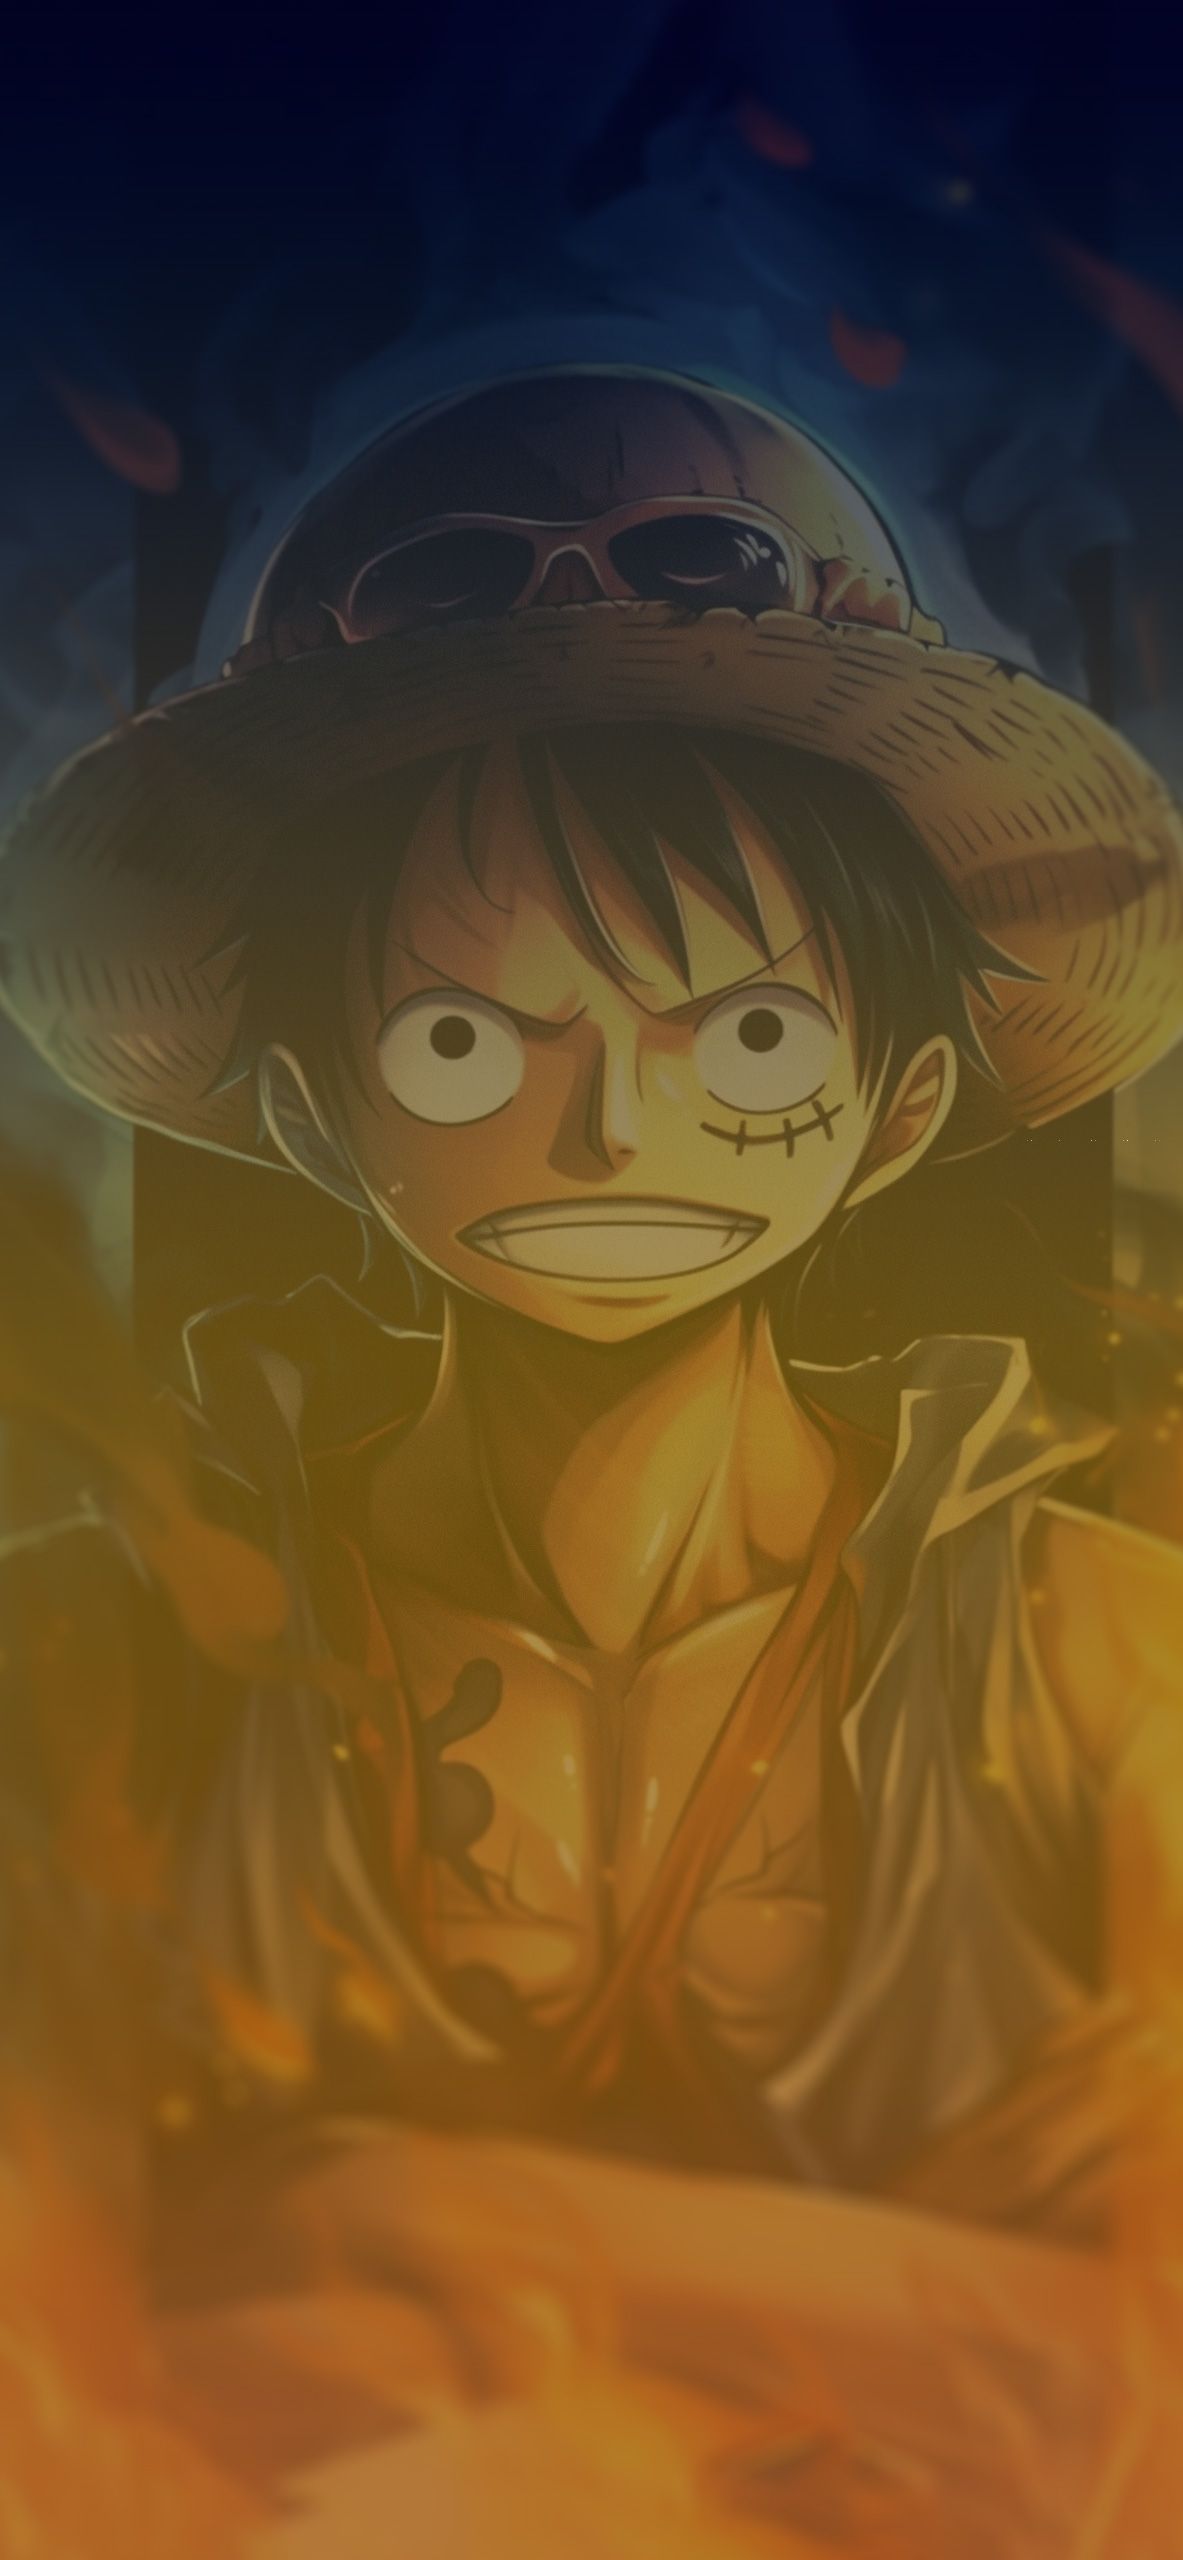 Monkey D. Luffy, the main protagonist of the One Piece series, is a young man with straw hat and straw clothes. - One Piece